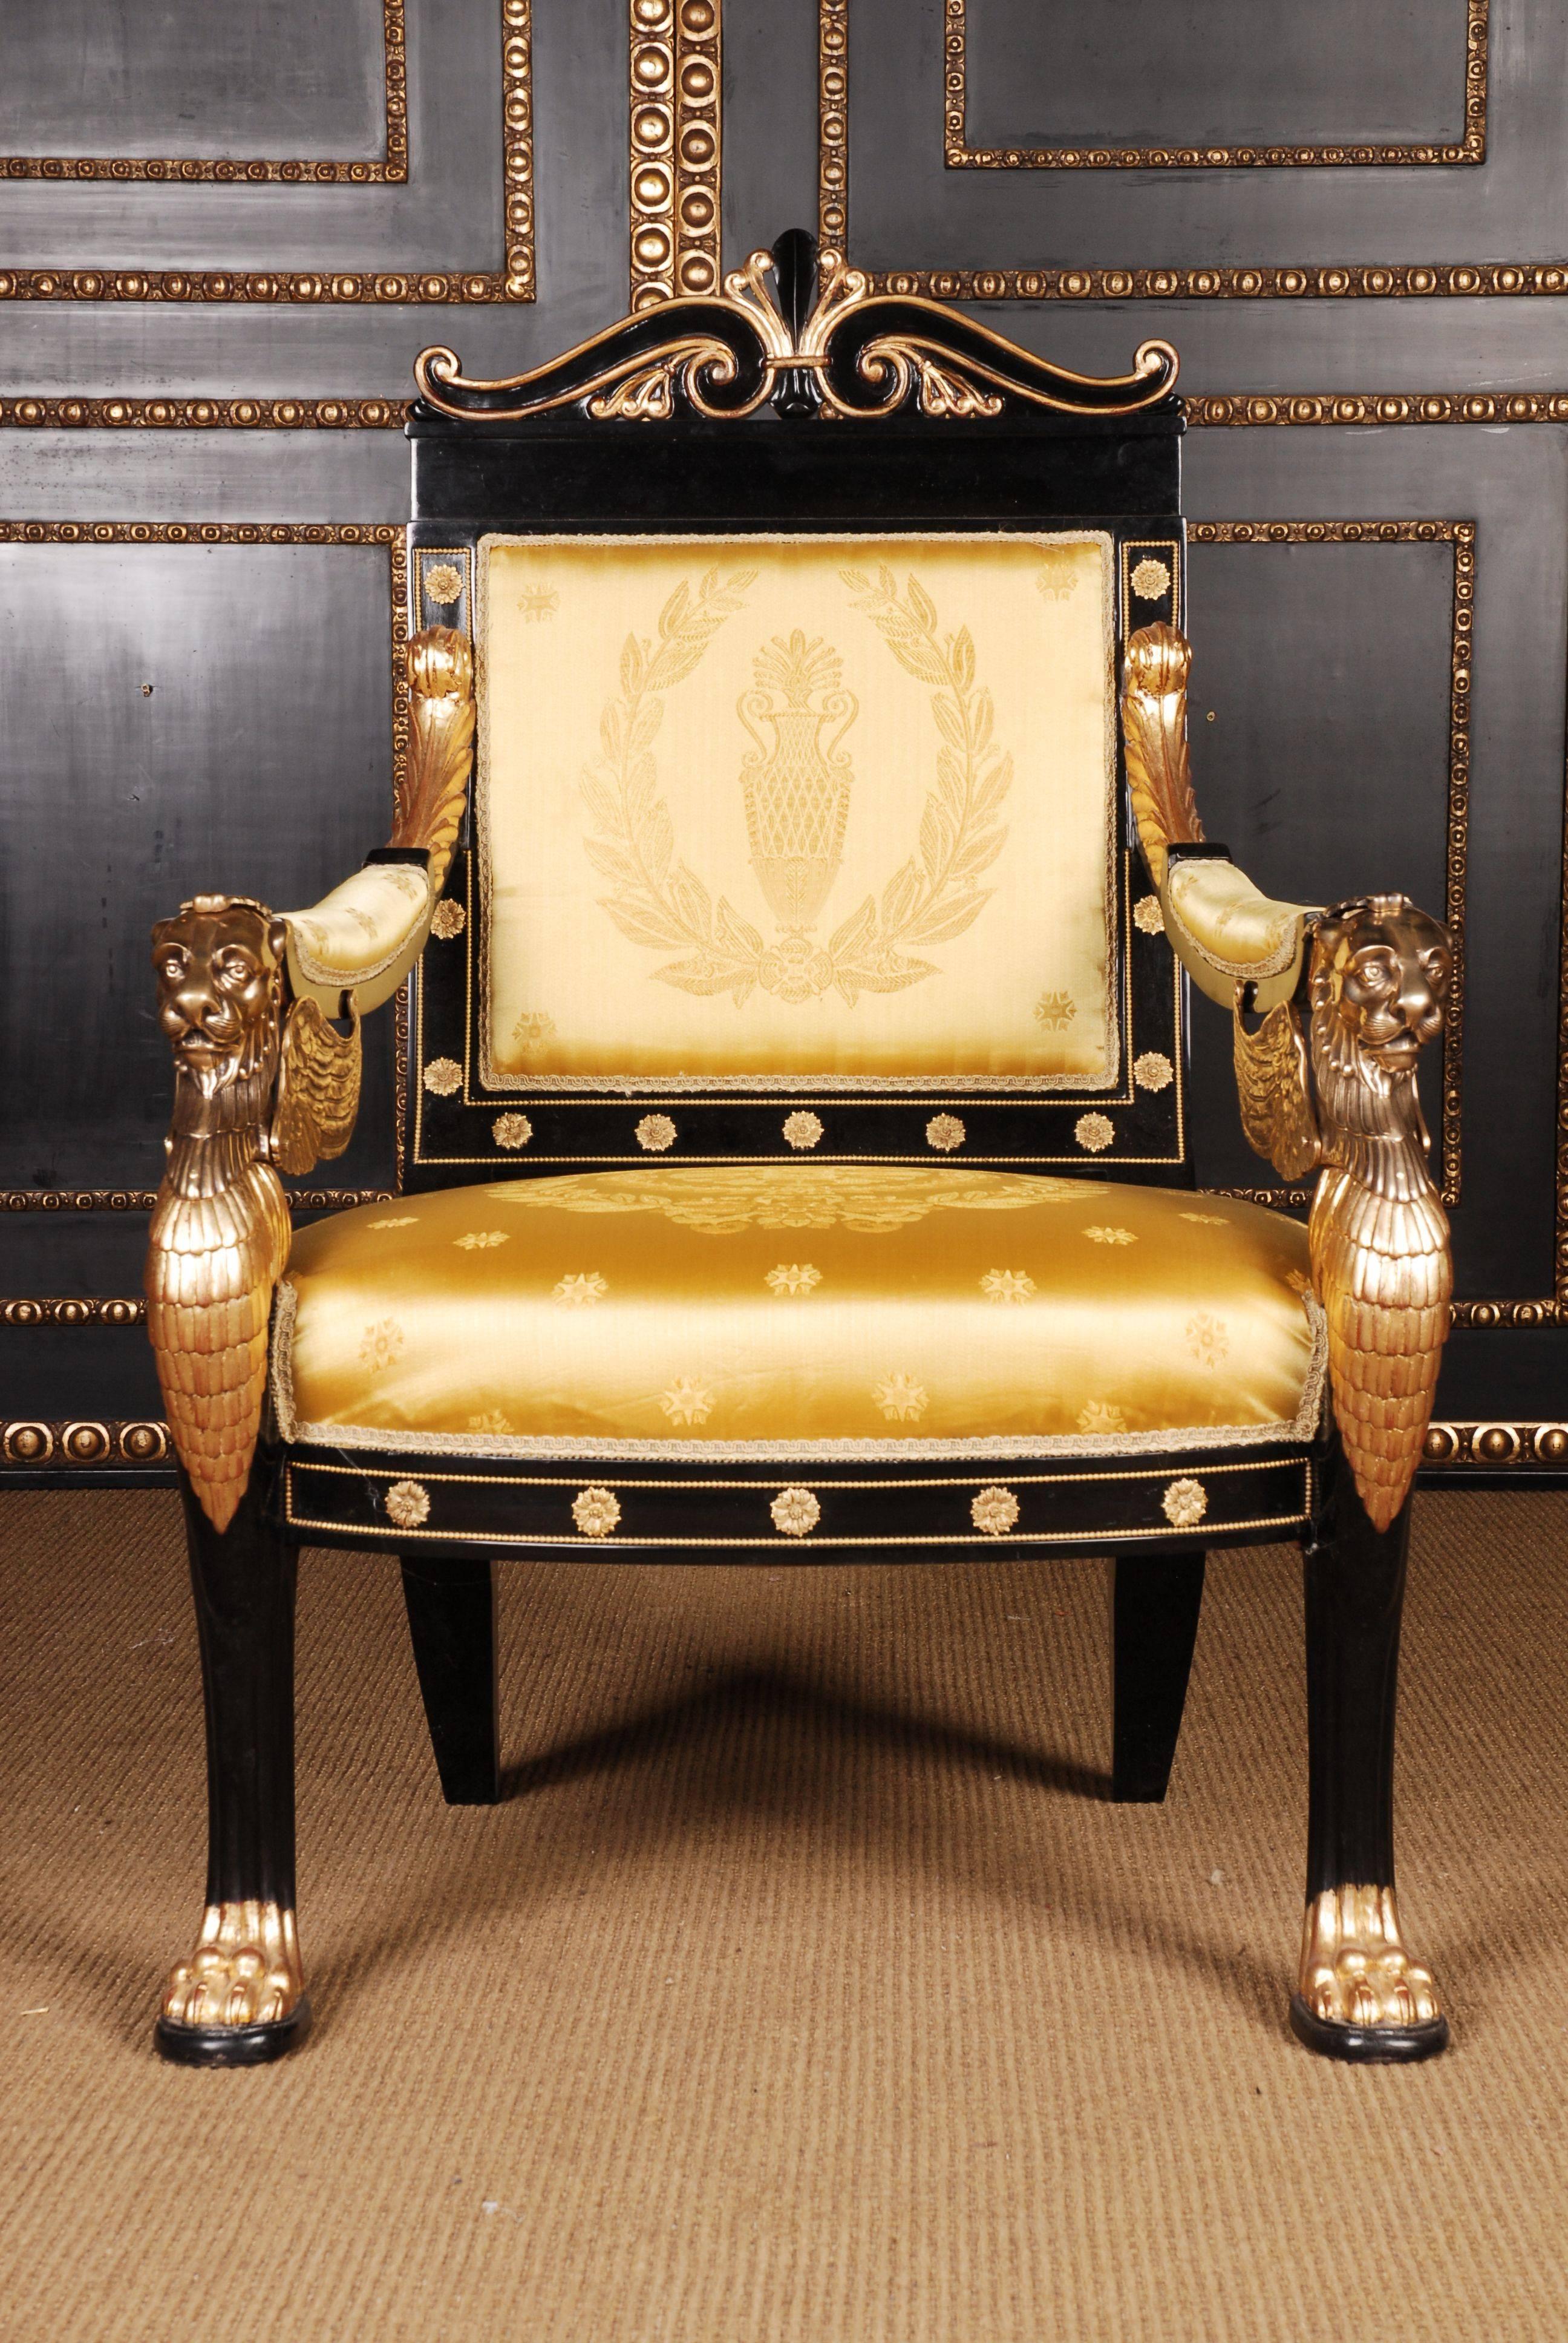 20th century Empire style lion armchair

Imperial stylish lion armchair in Empire style.
Finely detailed carving work on solid ebonized beechwood. Gilded. Winged, protruding lions heads in bronze.

Delivery time takes about 6-8